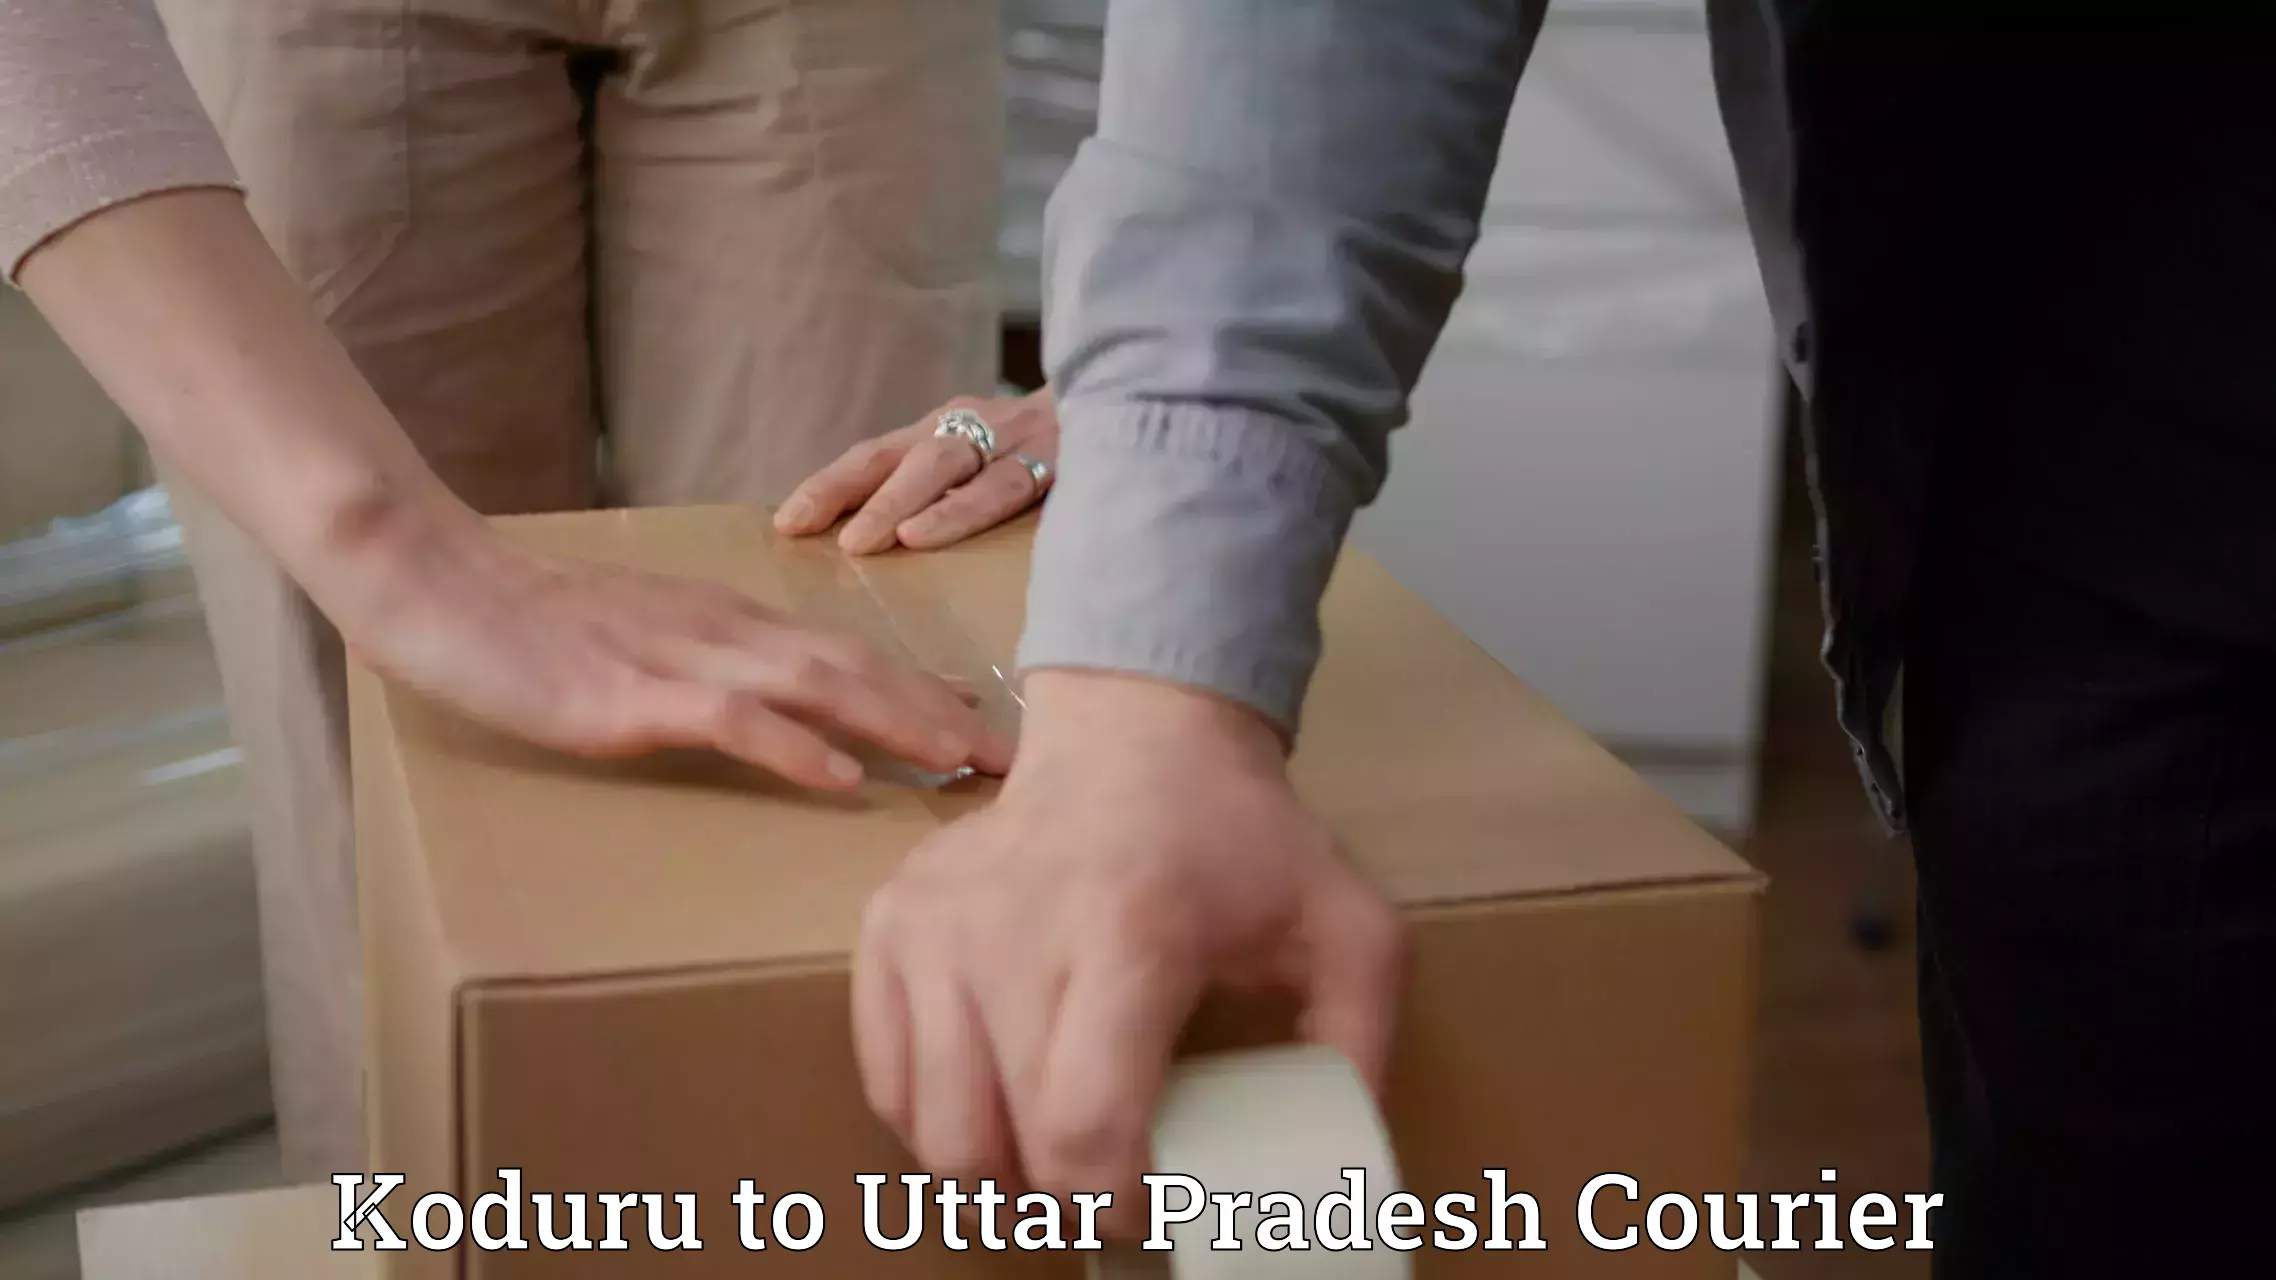 Easy access courier services Koduru to Fatehabad Agra